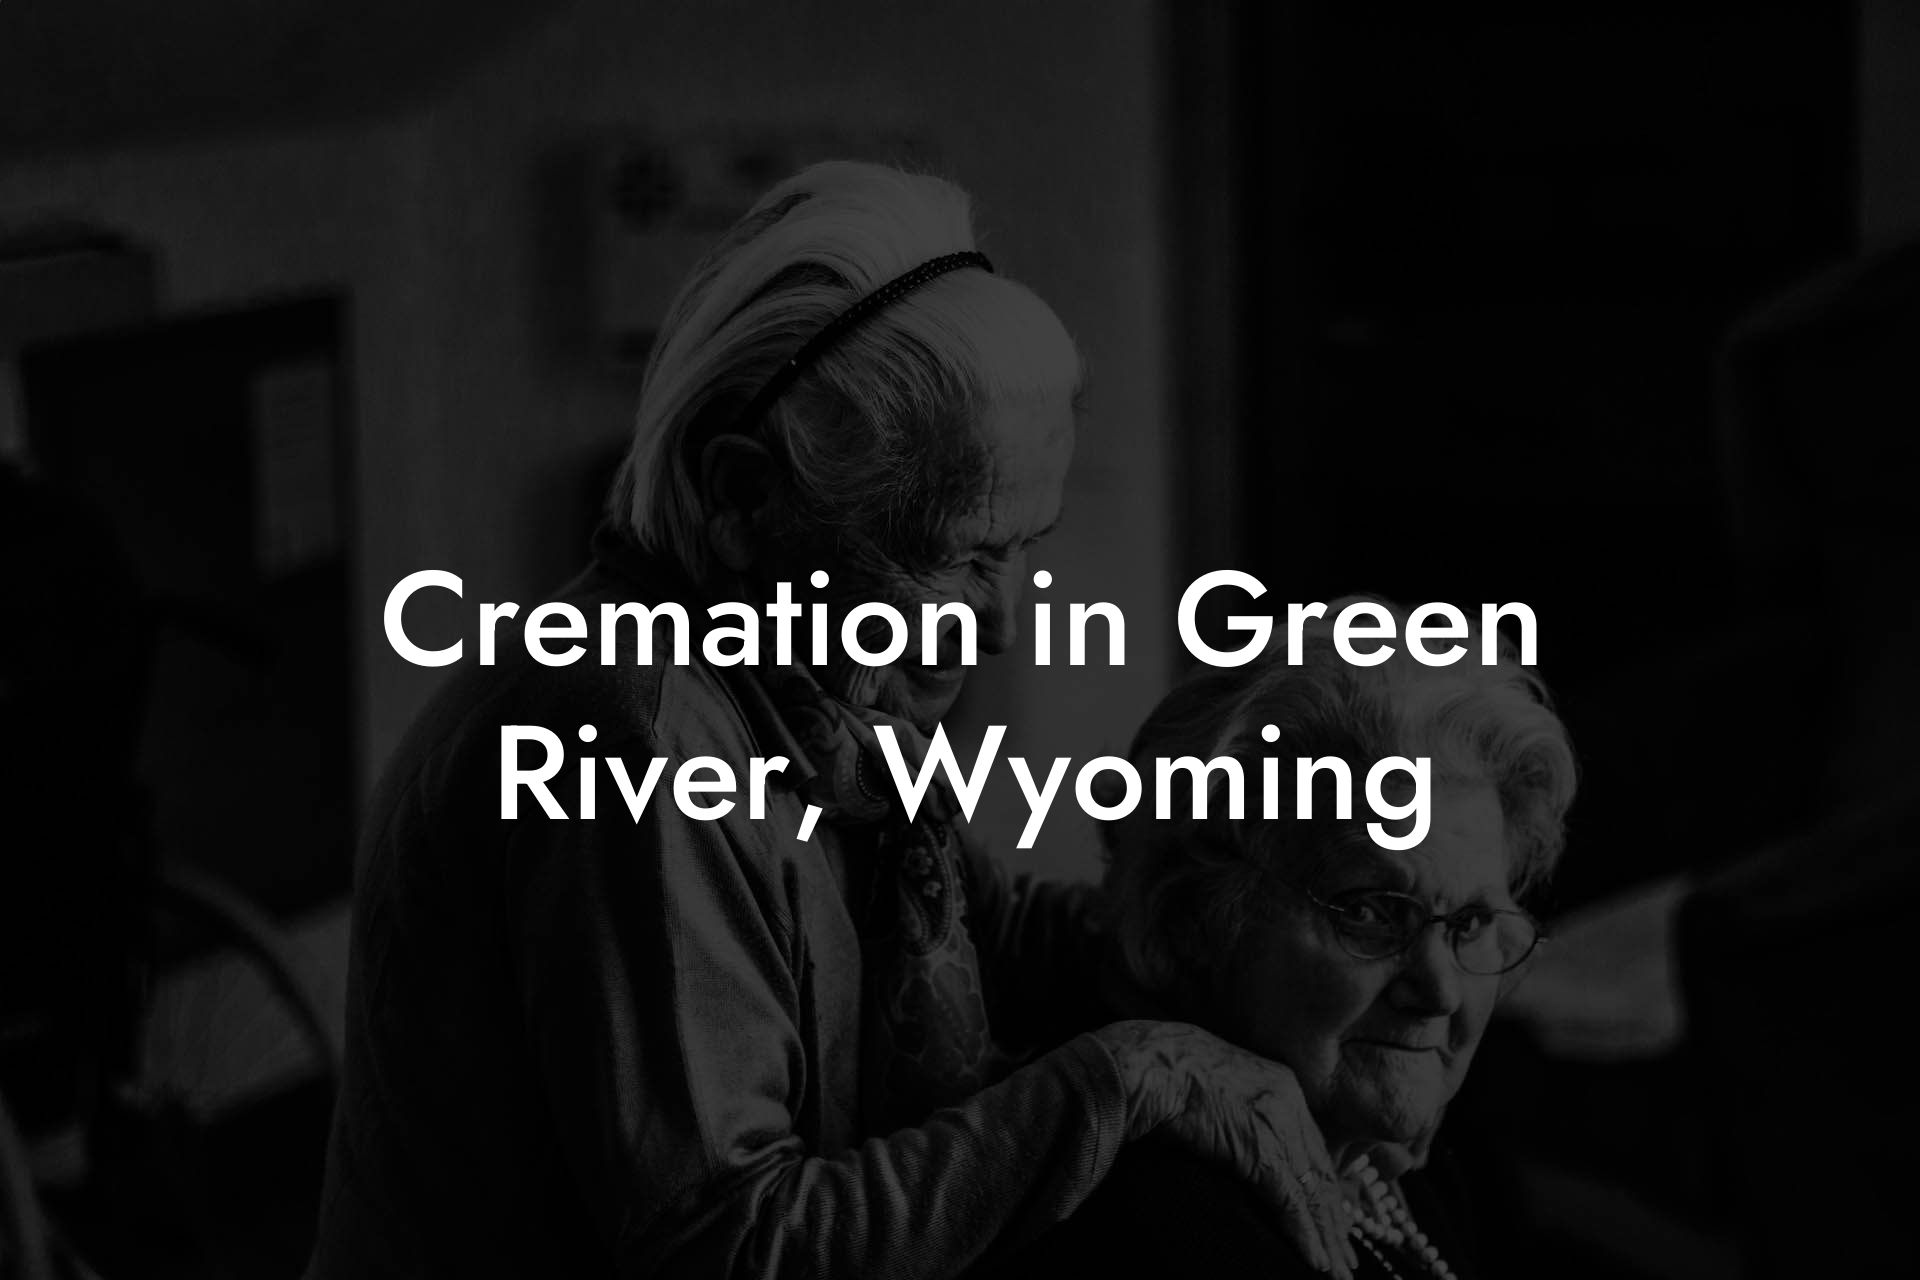 Cremation in Green River, Wyoming